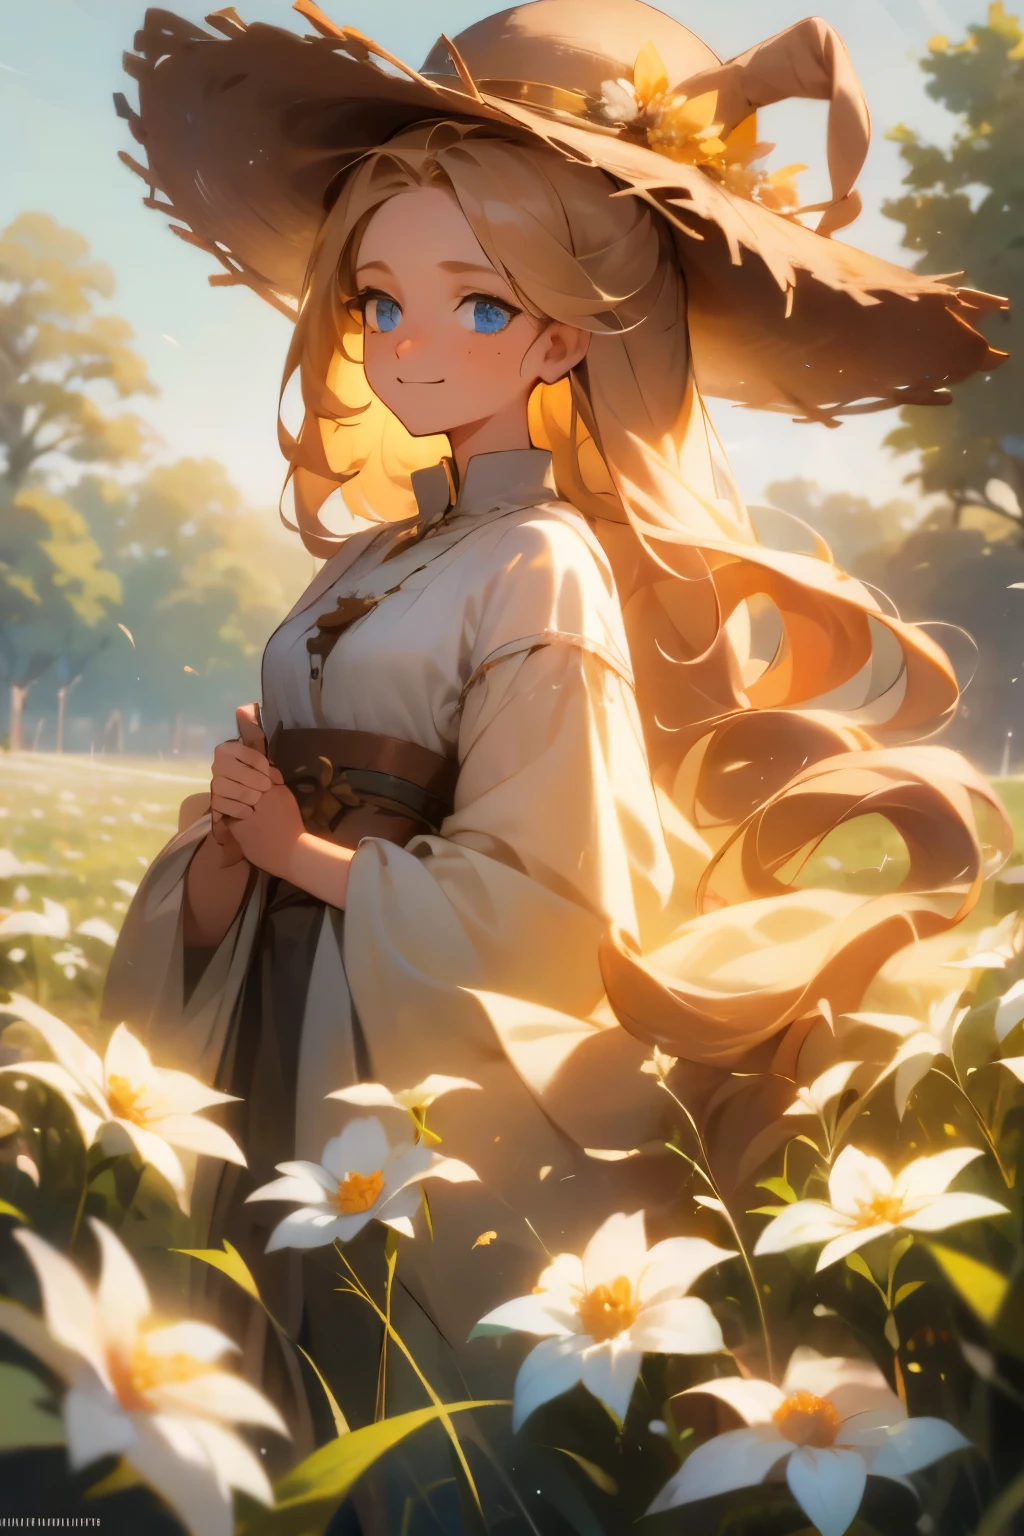 As the sun begins to set over a serene meadow, a serene meadow comes to life. In the center of the frame, a young buxom woman with freckles and very long curly blonde hair and a wide-brimmed hat gazes, tenderly into her surroundings. Her blue eyes bulge with a sense of contentment as she gazes towards the stars in the universe she occupies. The air is still, and the scent of fresh flowers fills the air, casting a soft golden glow on the landscape below. The words "innocent smile" are visible and hidden, a reminder of the boundless possibilities that can be found in the realm of imagination.